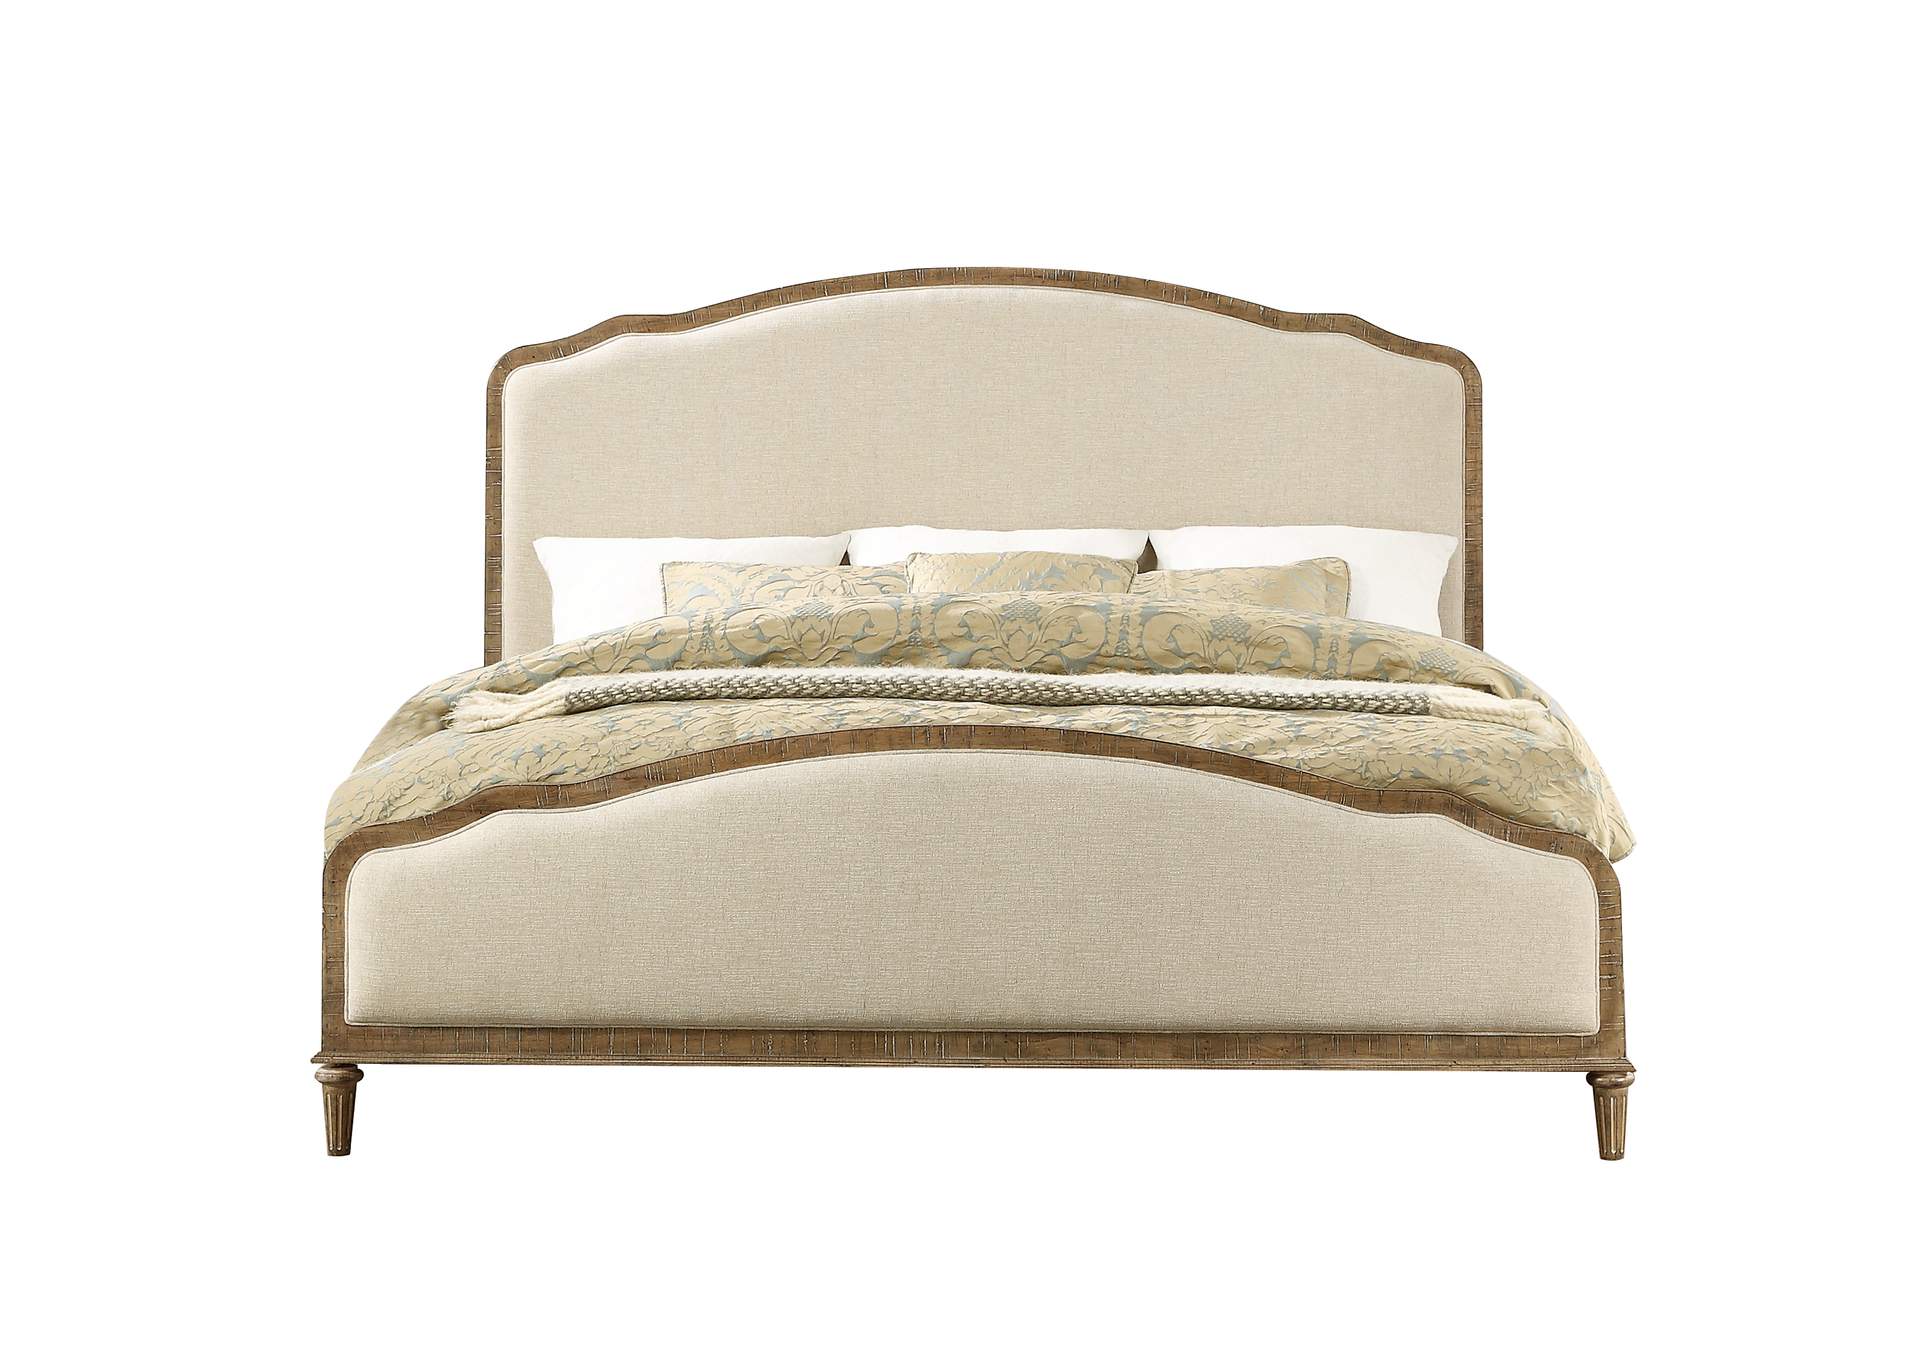 Interlude King Upholstered Bed,Emerald Home Furnishings